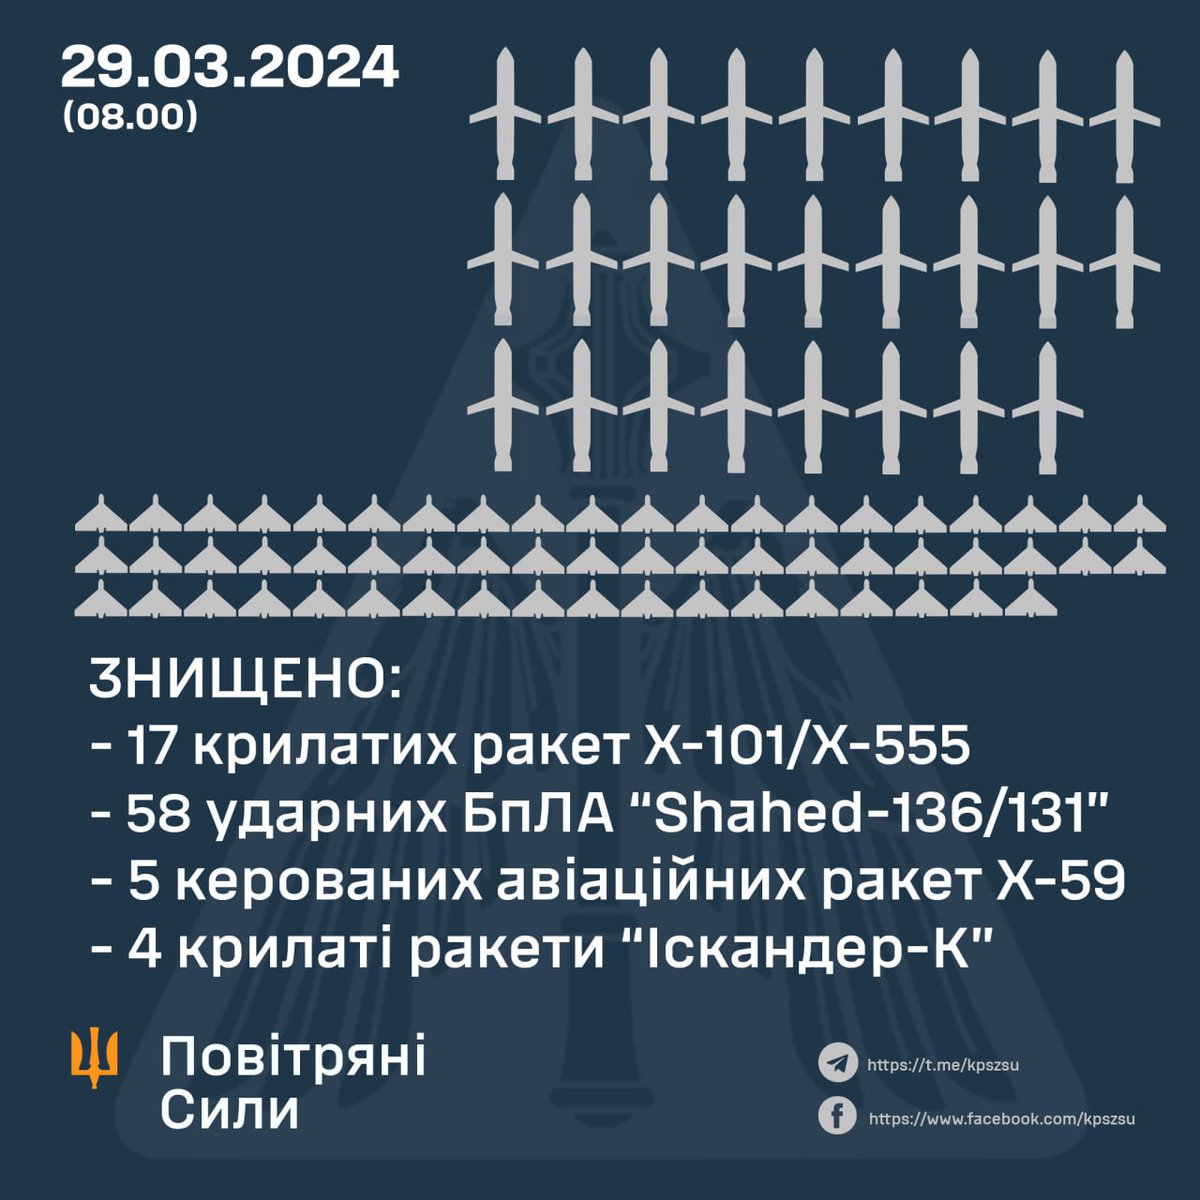 58 of 60 russian (Iranian) large 'Shahed' military drones and 26 of 39 russian ballistic and cruise missiles have been shot down over Ukraine this night. Glory to G-d and the anti-missile forces of Ukraine!!!